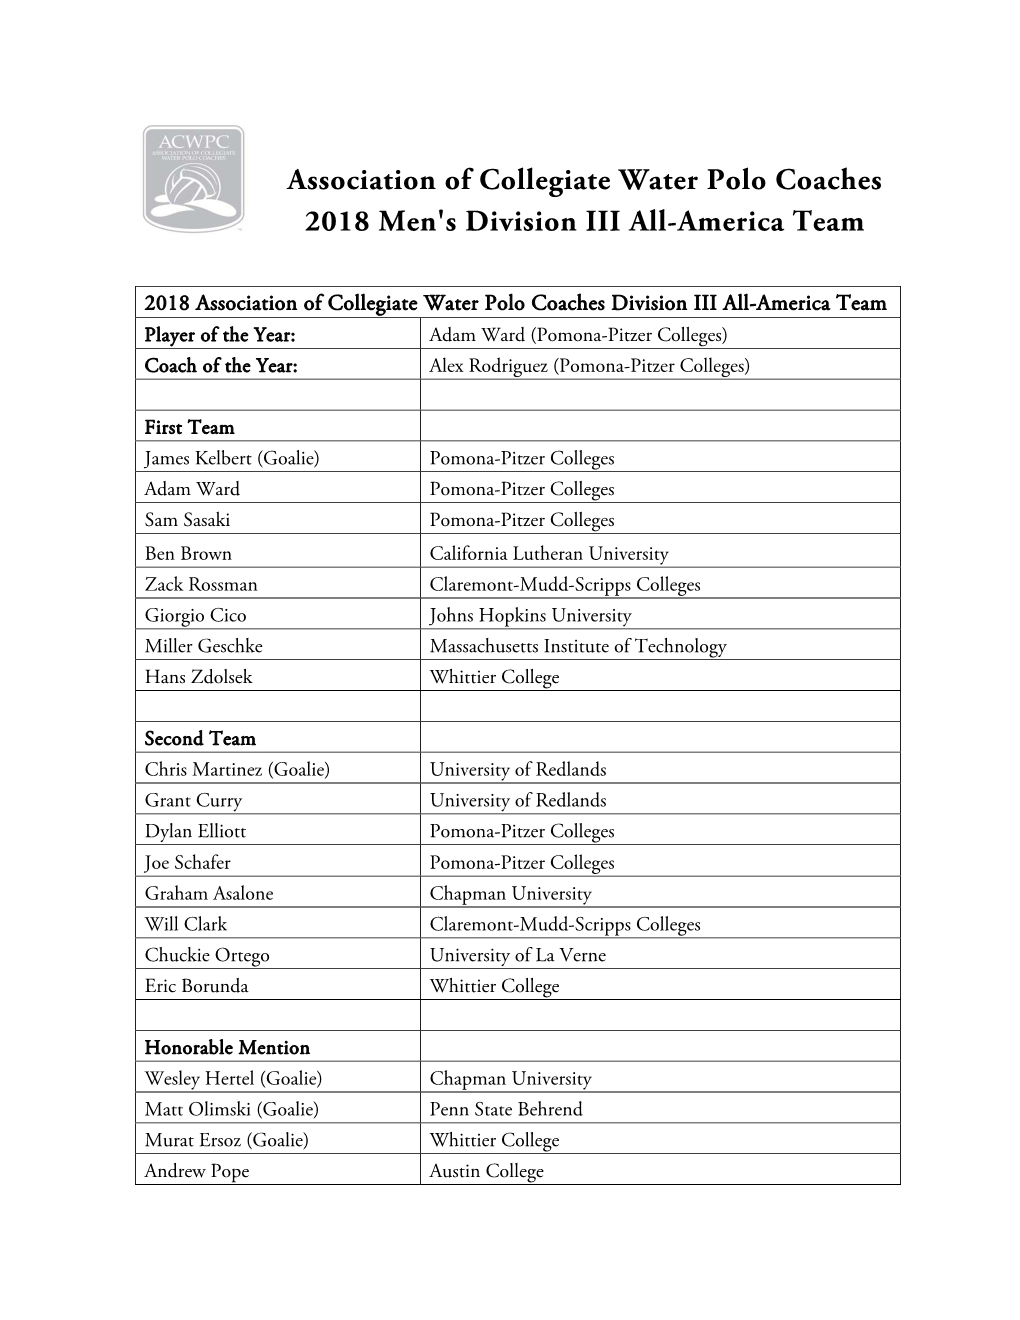 Association of Collegiate Water Polo Coaches 2018 Men's Division III All-America Team